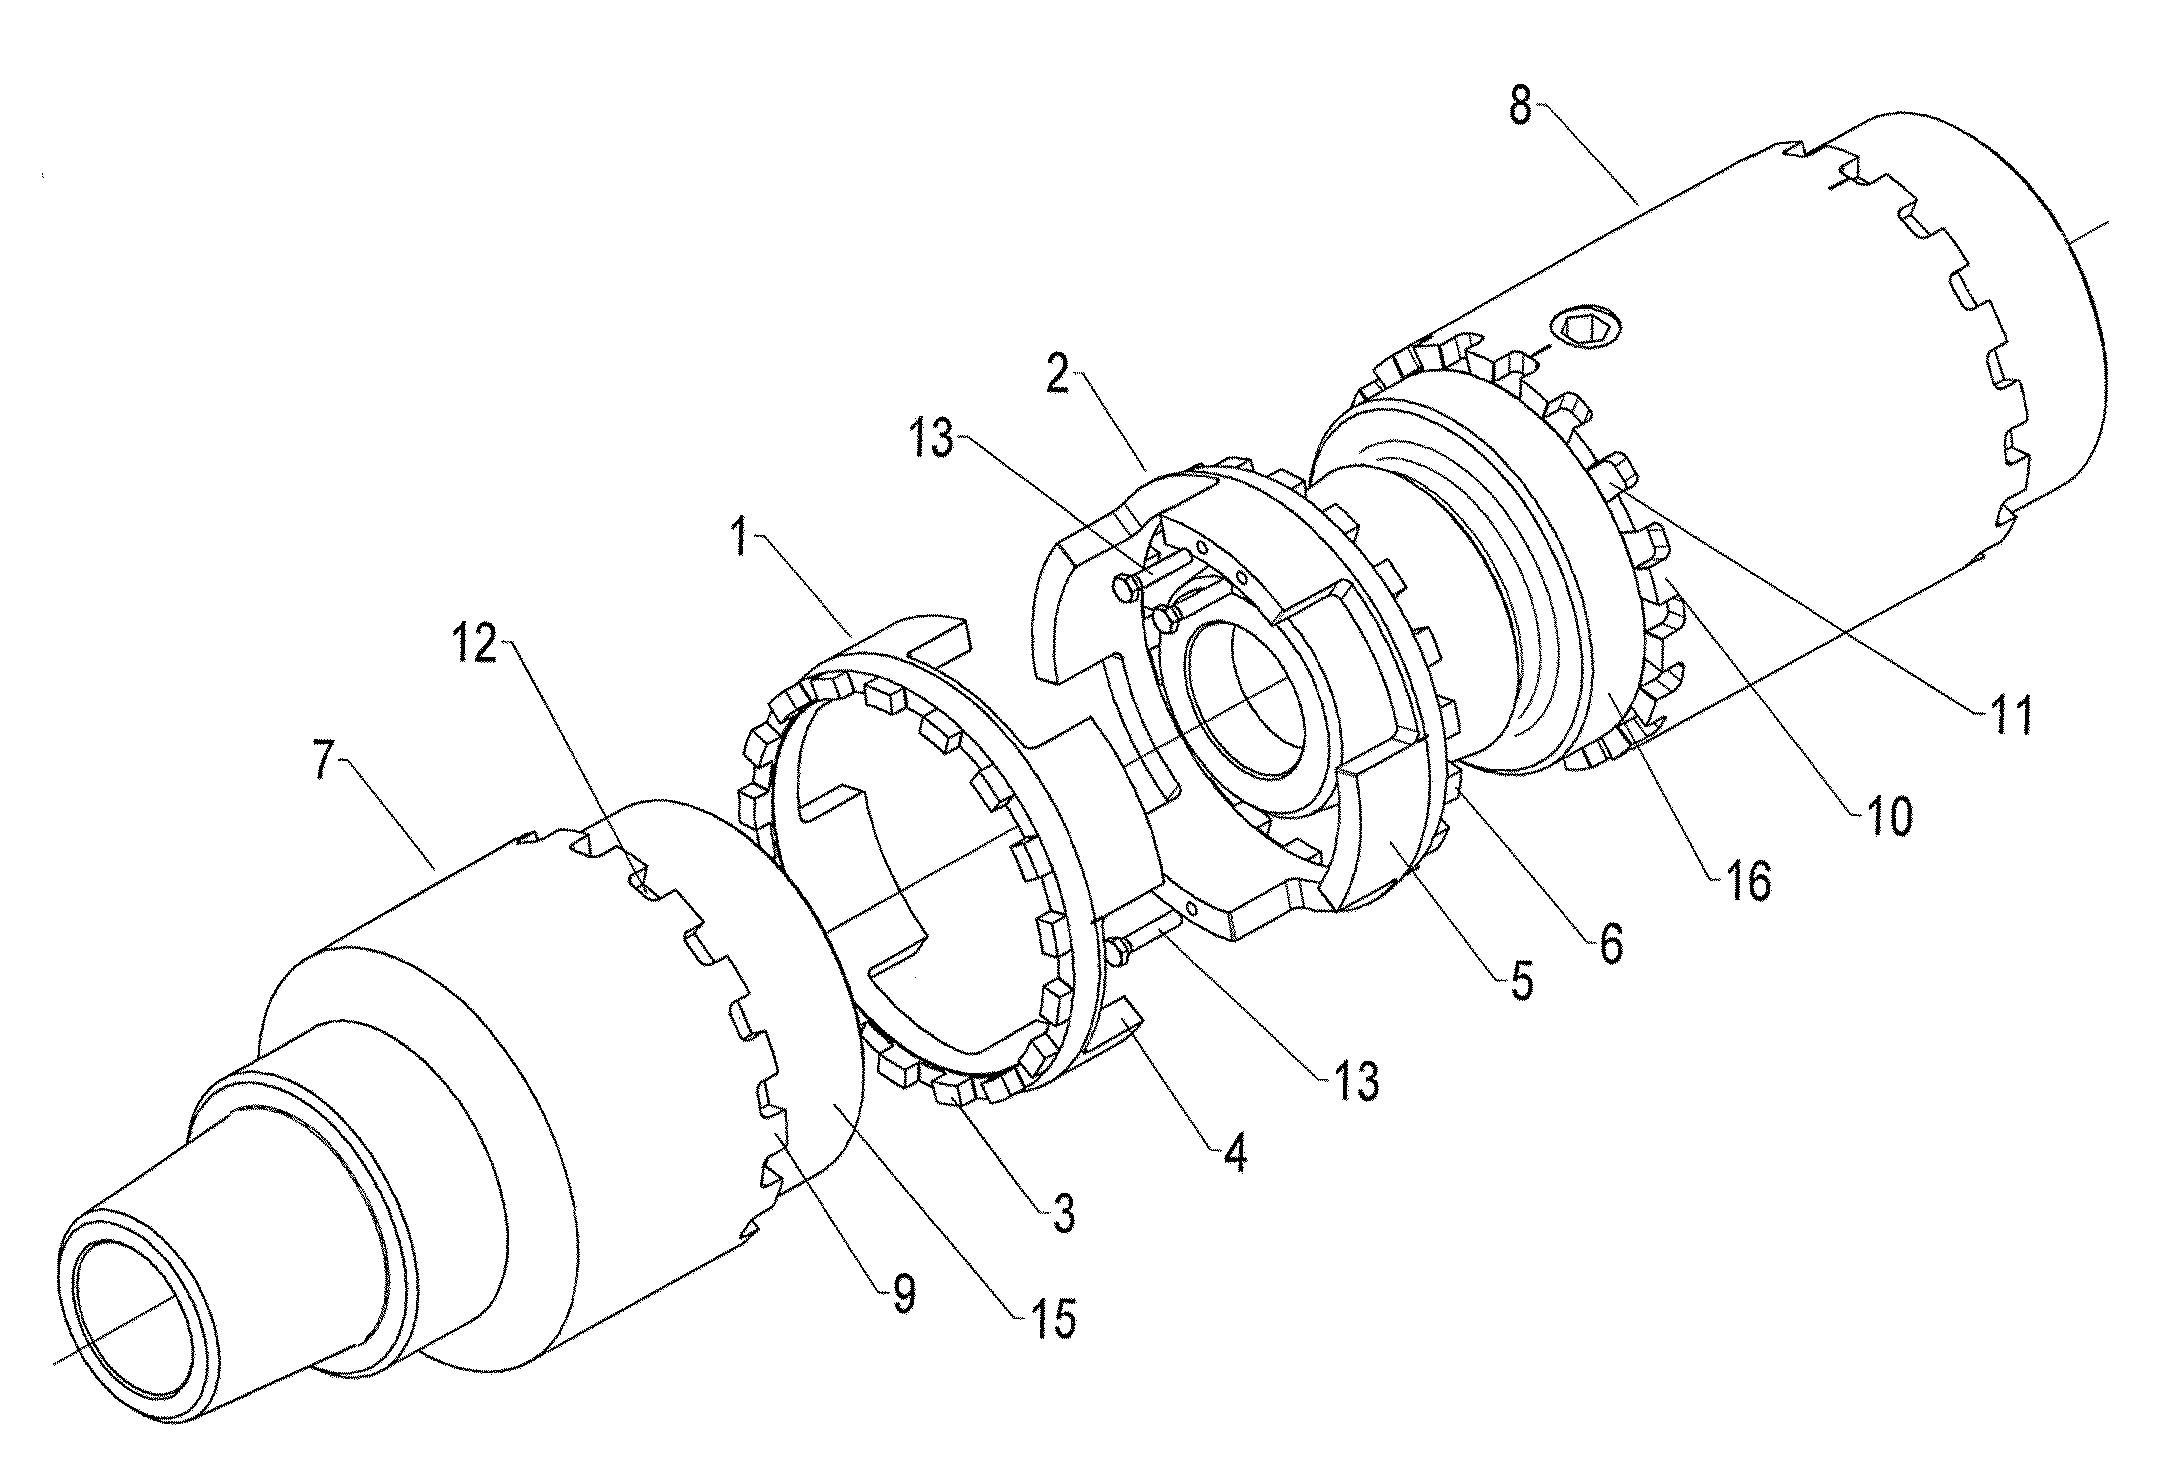 Locking device for built pipe connections